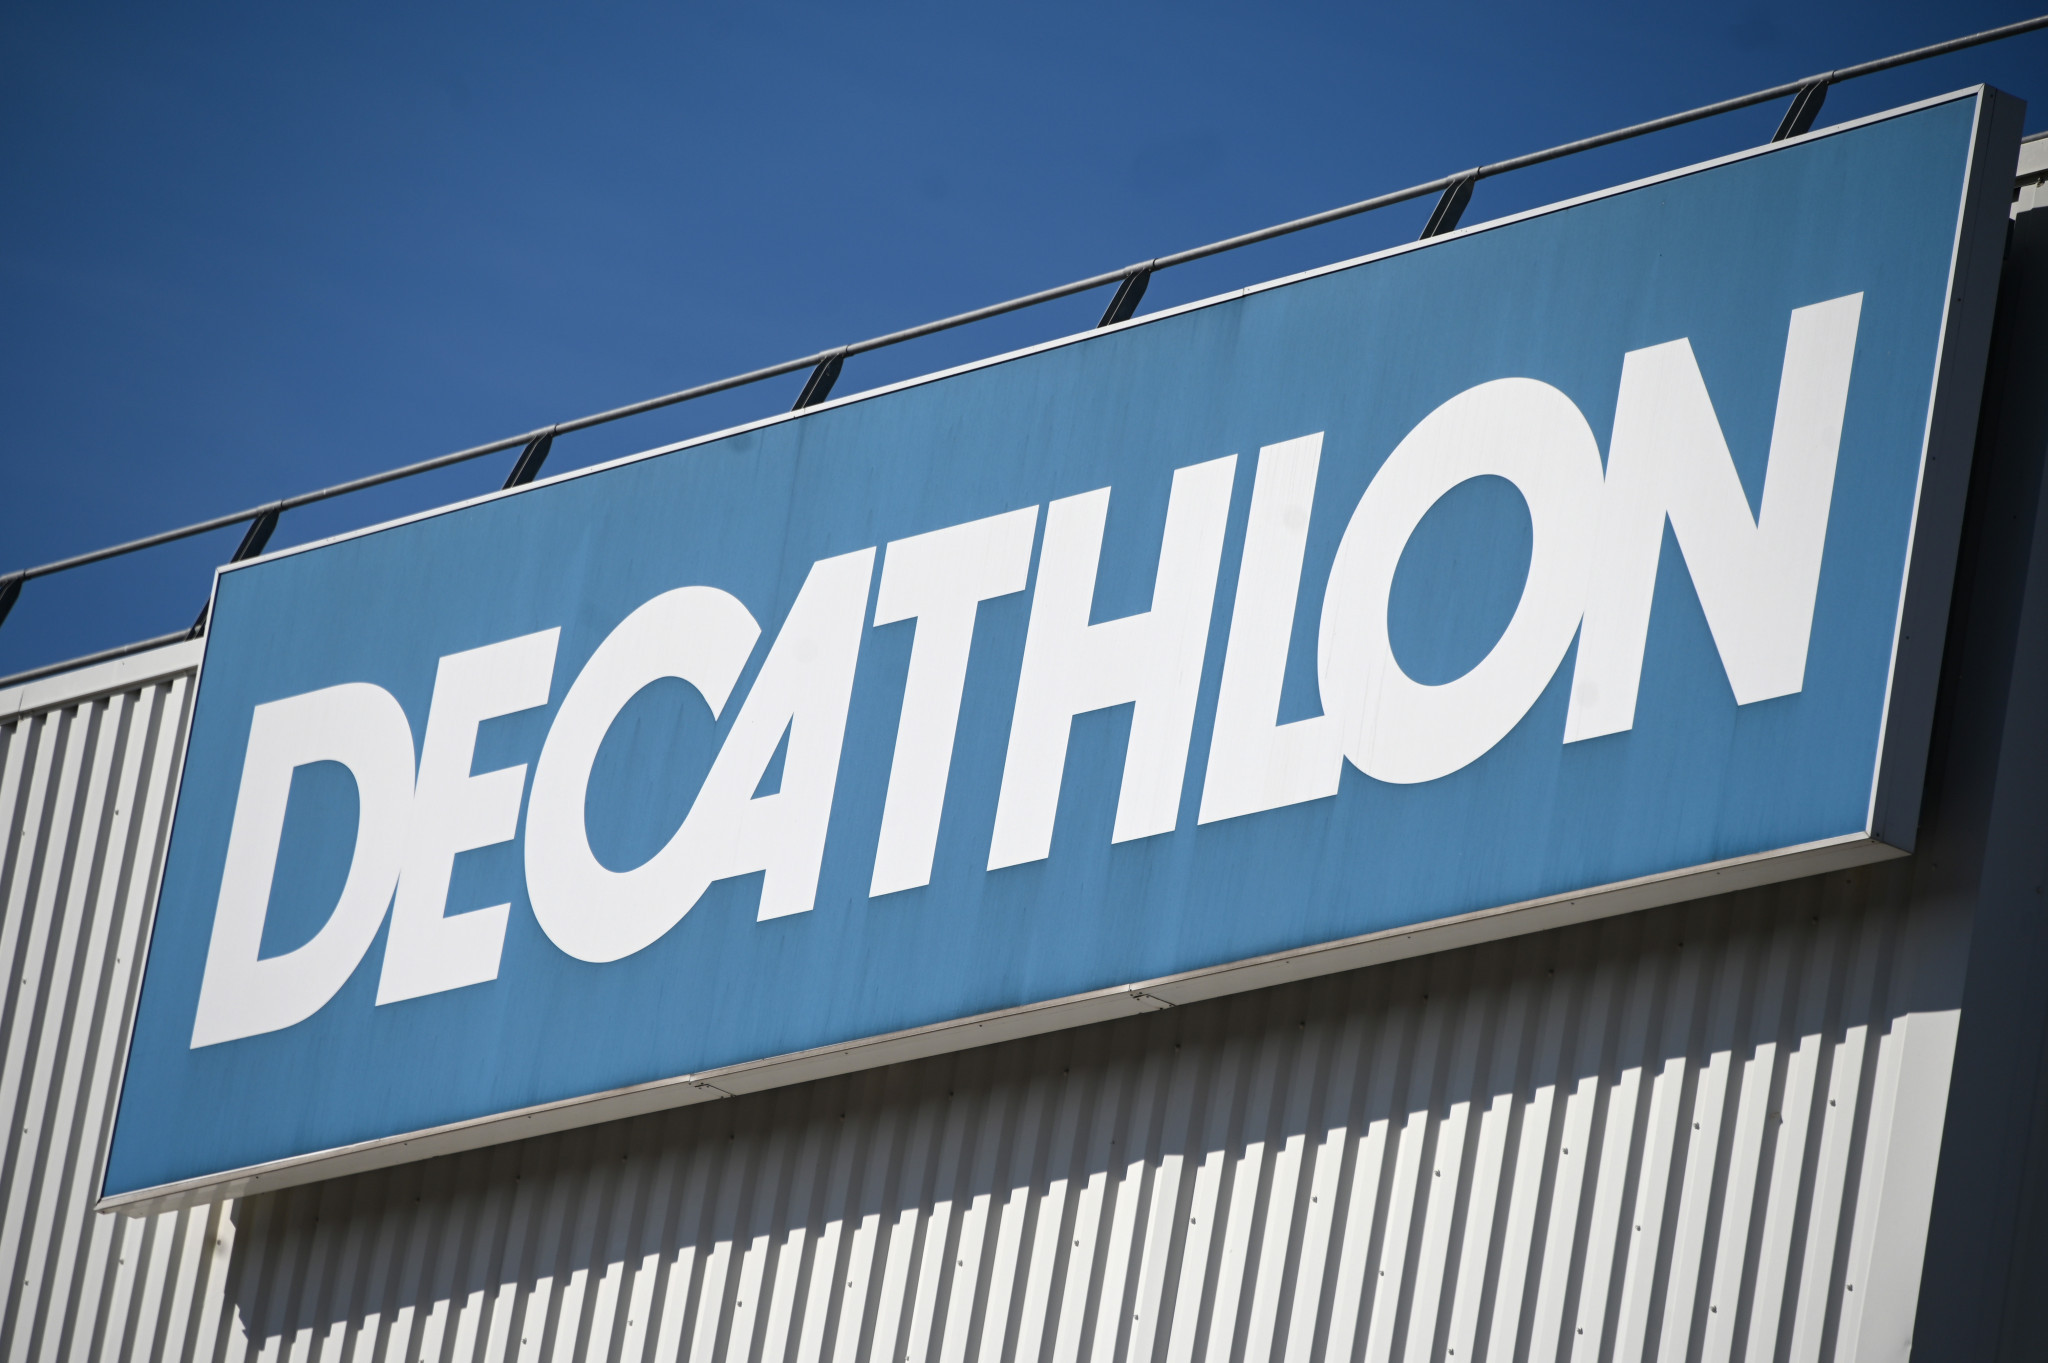 Decathlon recruits 33 sporting stars included in its "Team Athletes" for Paris 2024 